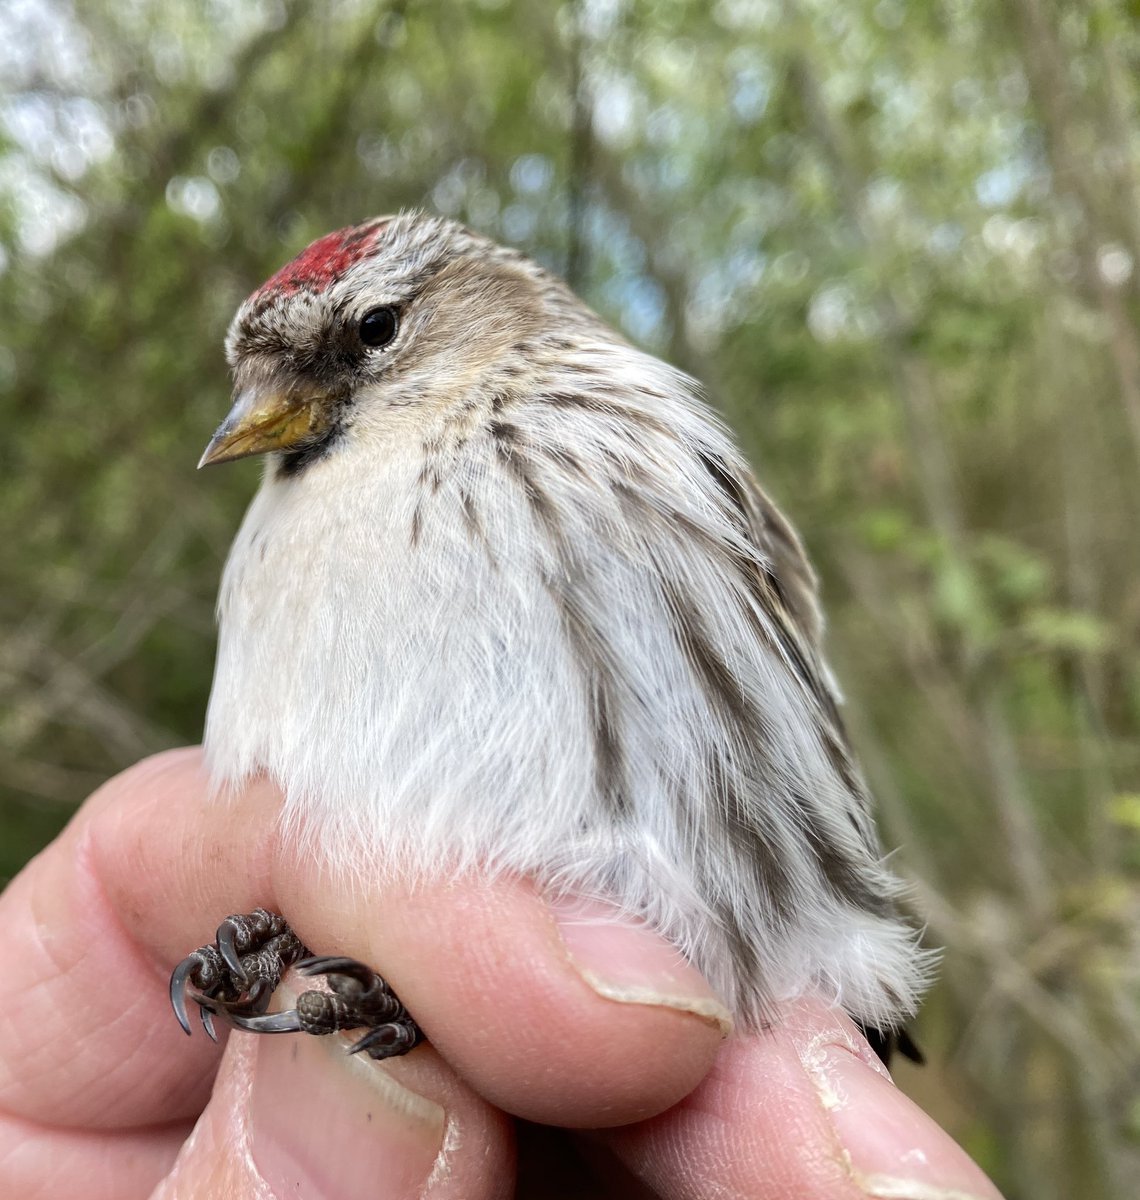 Well I wasn’t expecting this on 21st April! Stonking Common Redpoll caught and ringed along with 15 Lesser Redpoll, at Wicken Fen today 😀@CambsBirdClub